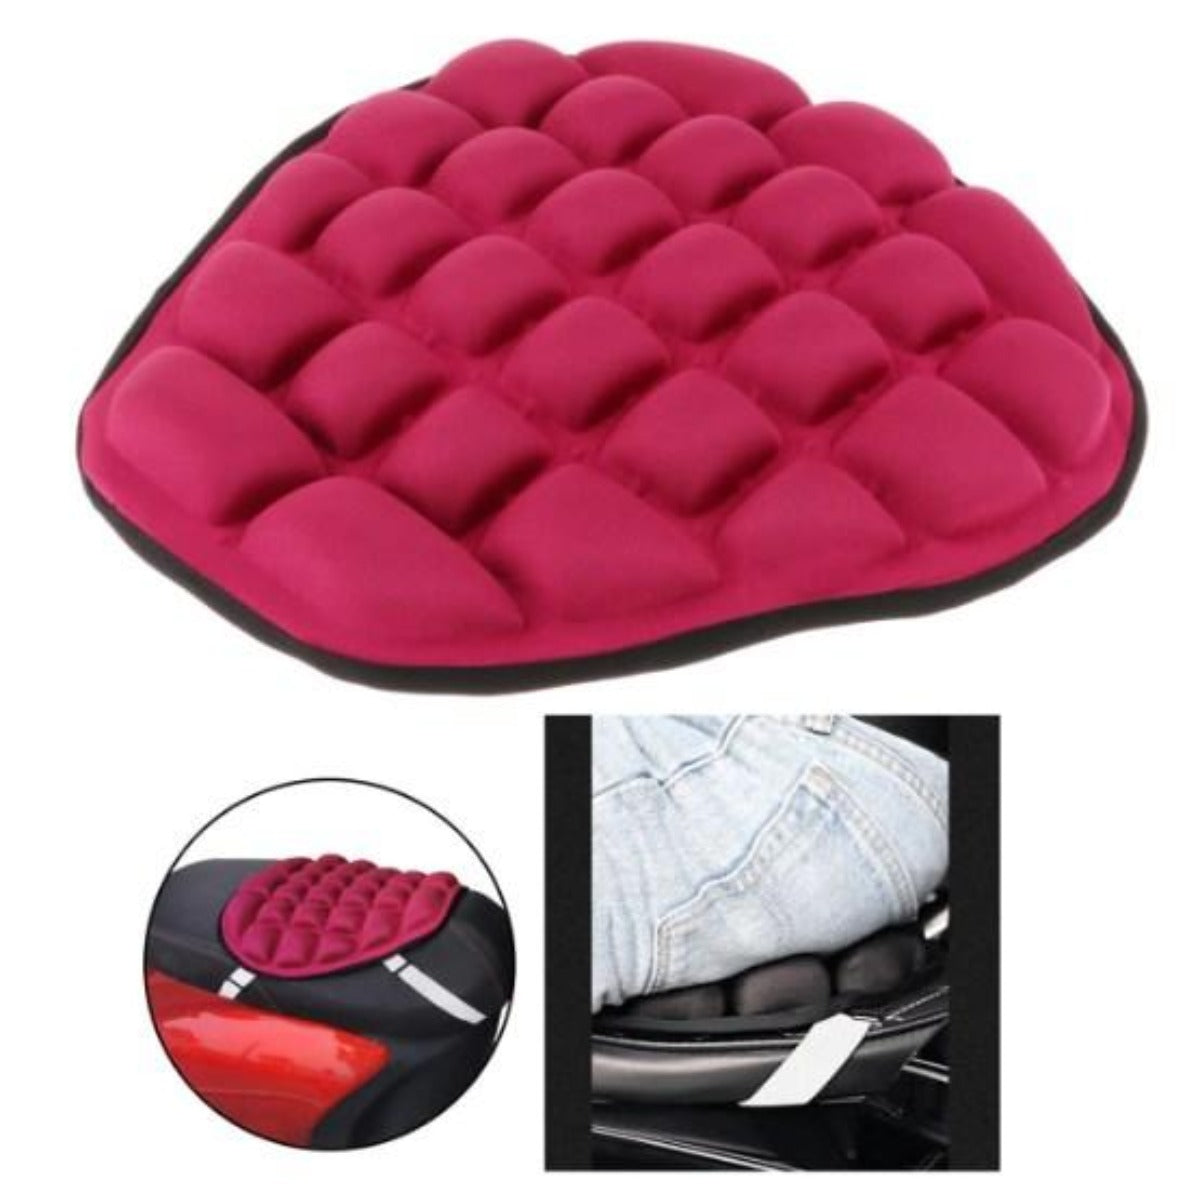 A pink and black Motorcycle Seat Cushion Pad with shock absorption for a motorcycle.